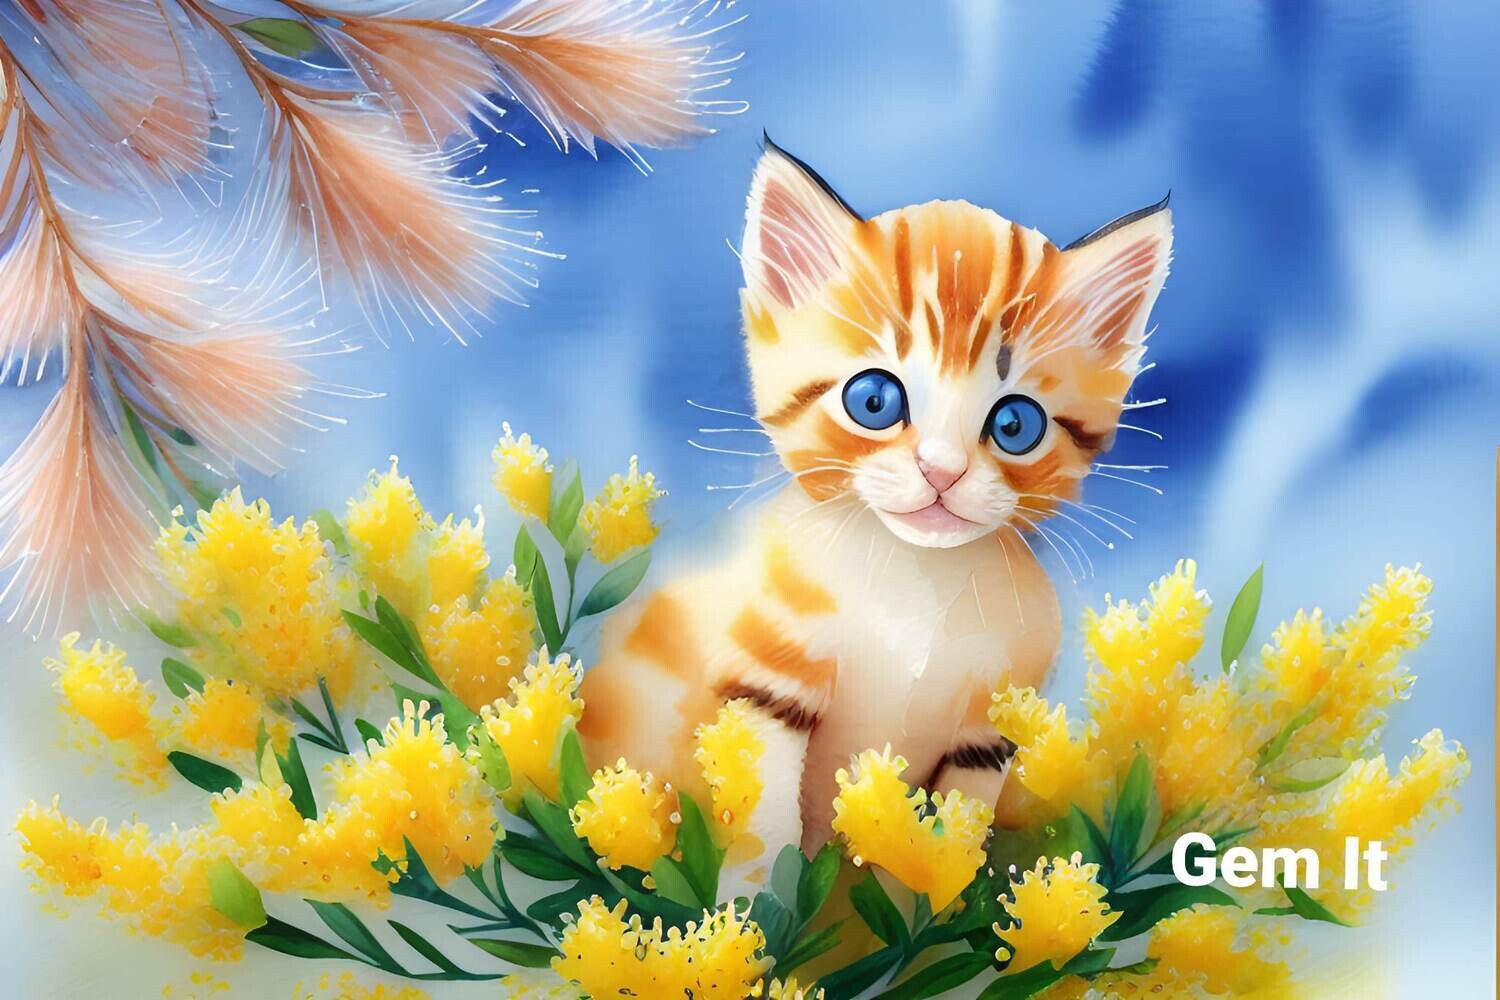 Kitten in Wattle 1 - Specially ordered for you. Delivery is approximately 4 - 6 weeks.